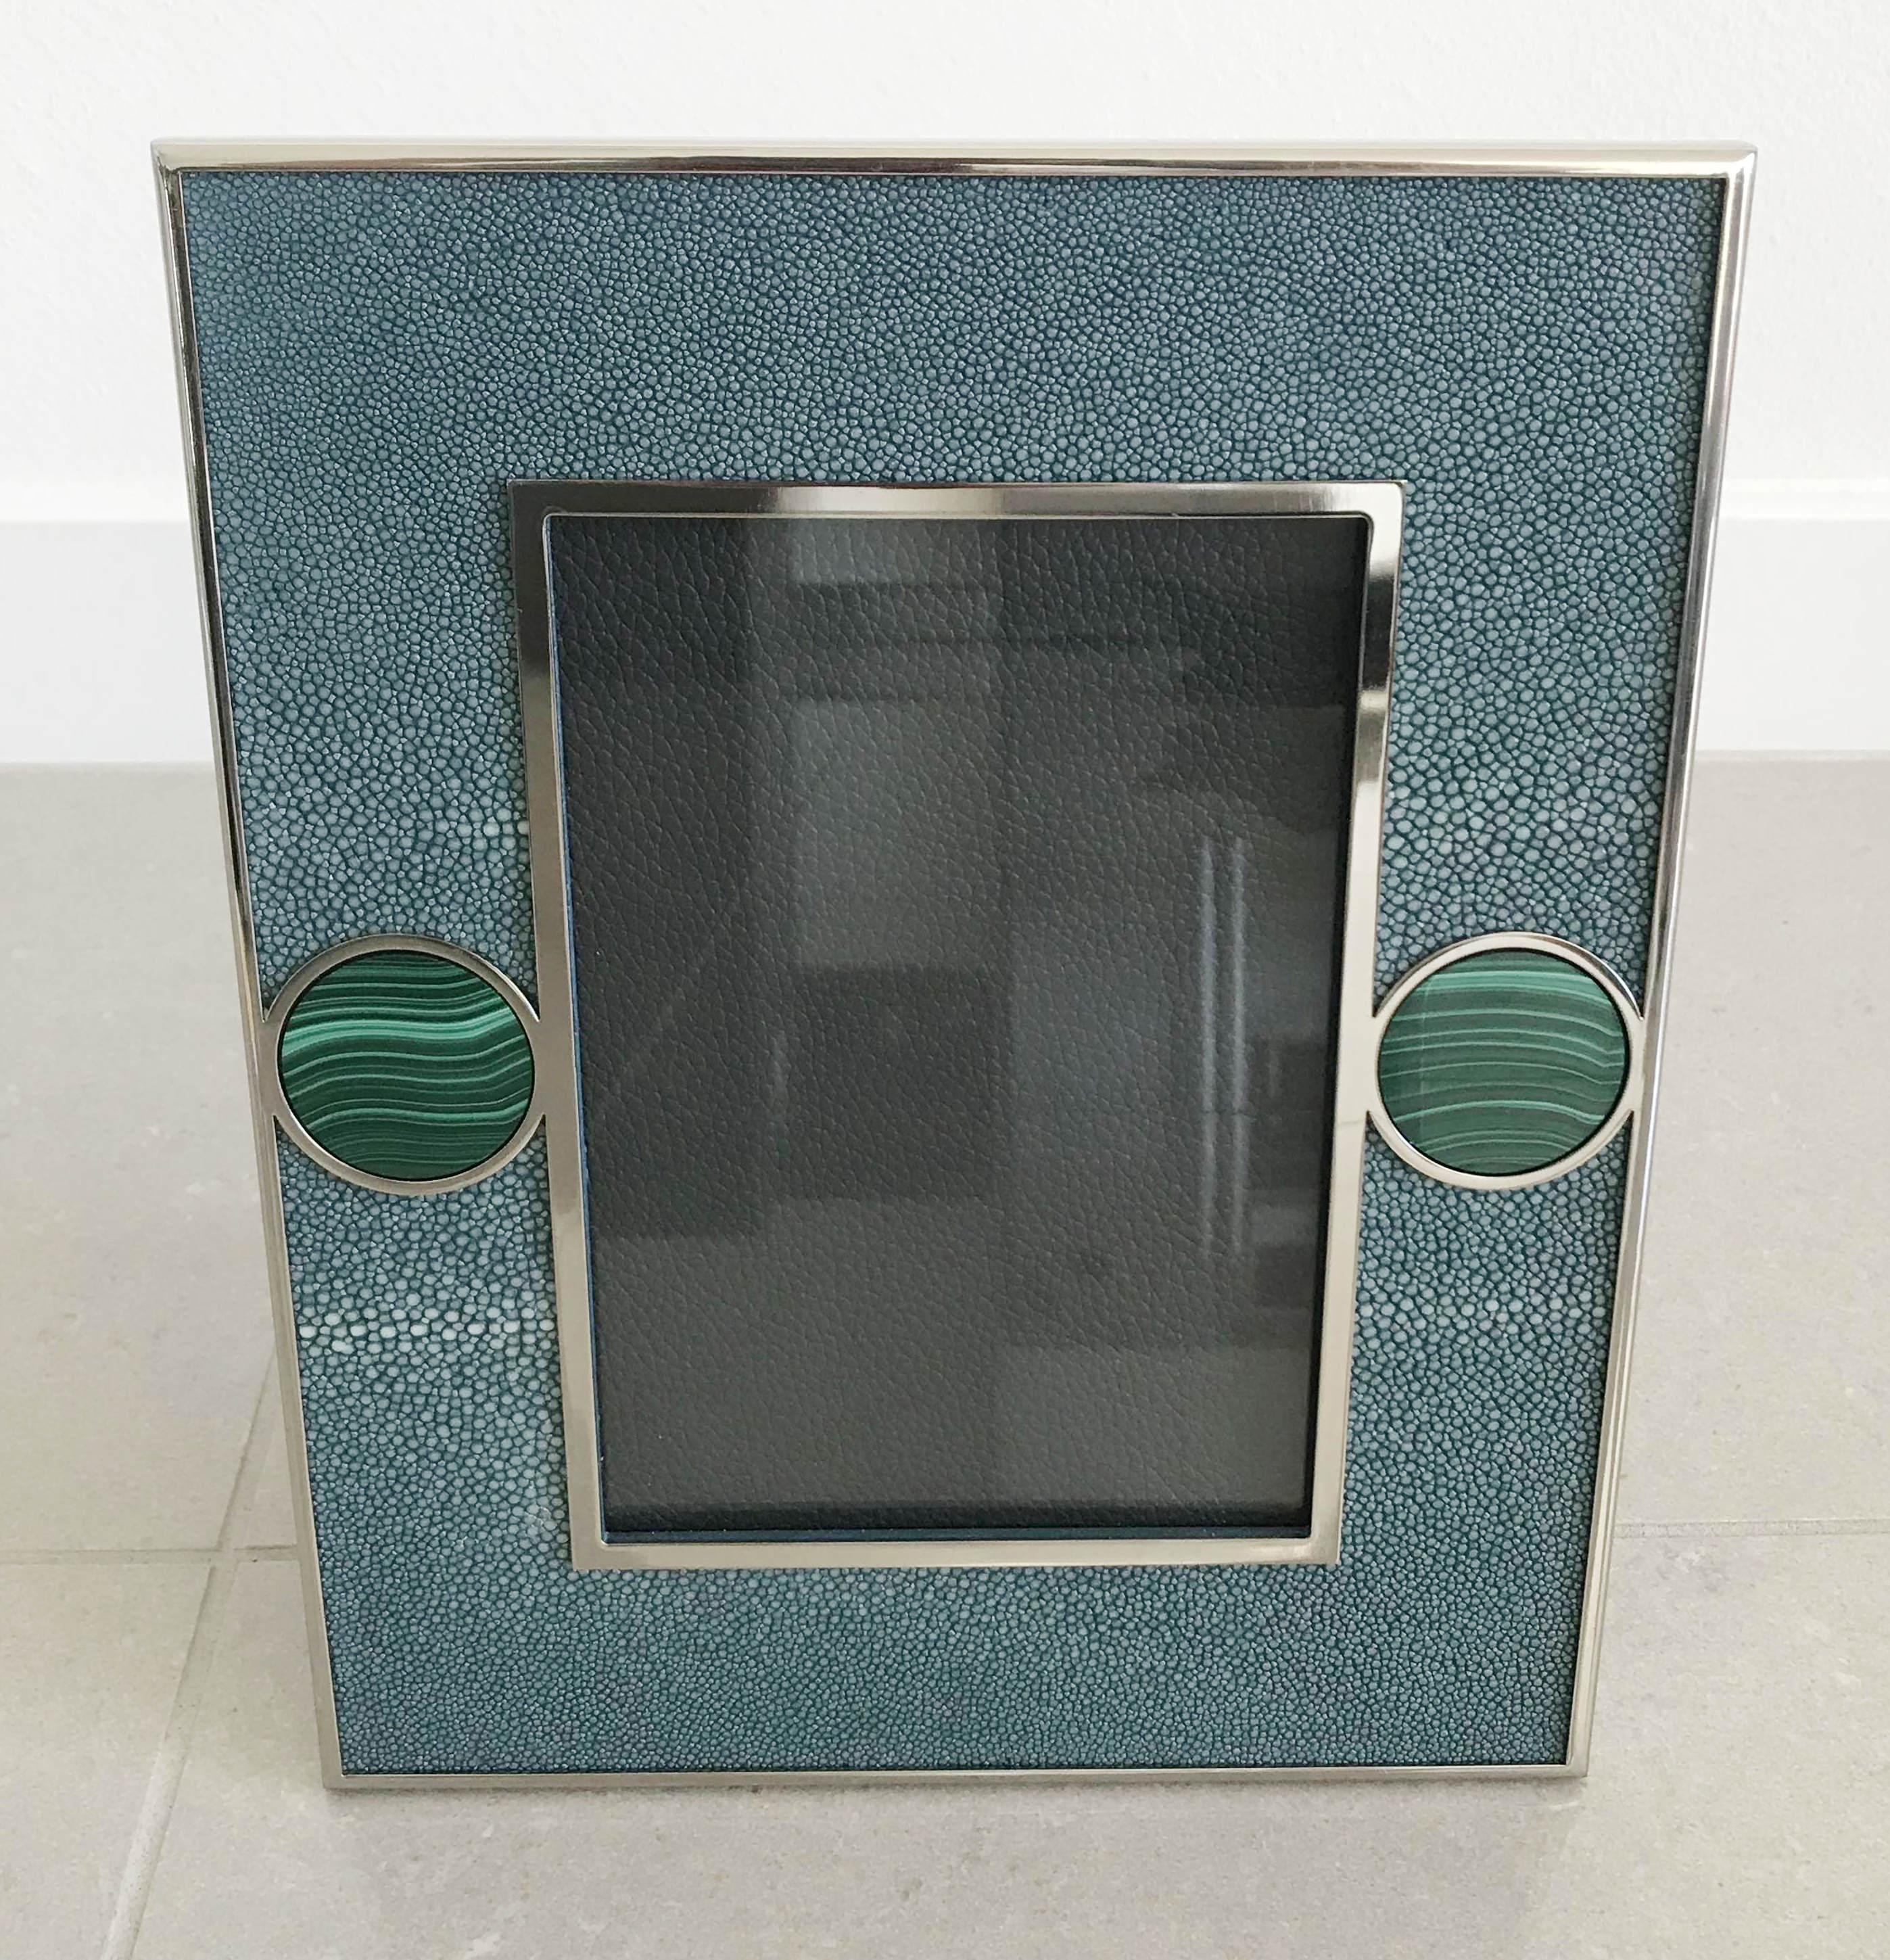 Blue shagreen leather with malachite inserts and nickel-plated picture frame by Fabio Ltd
Measures: Height 10.5 inches, width 8.5 inches, depth 1 inch
Photo size: 5 inches by 7 inches
LAST 1 in stock in Palm Springs ON 30% OFF SALE for $945